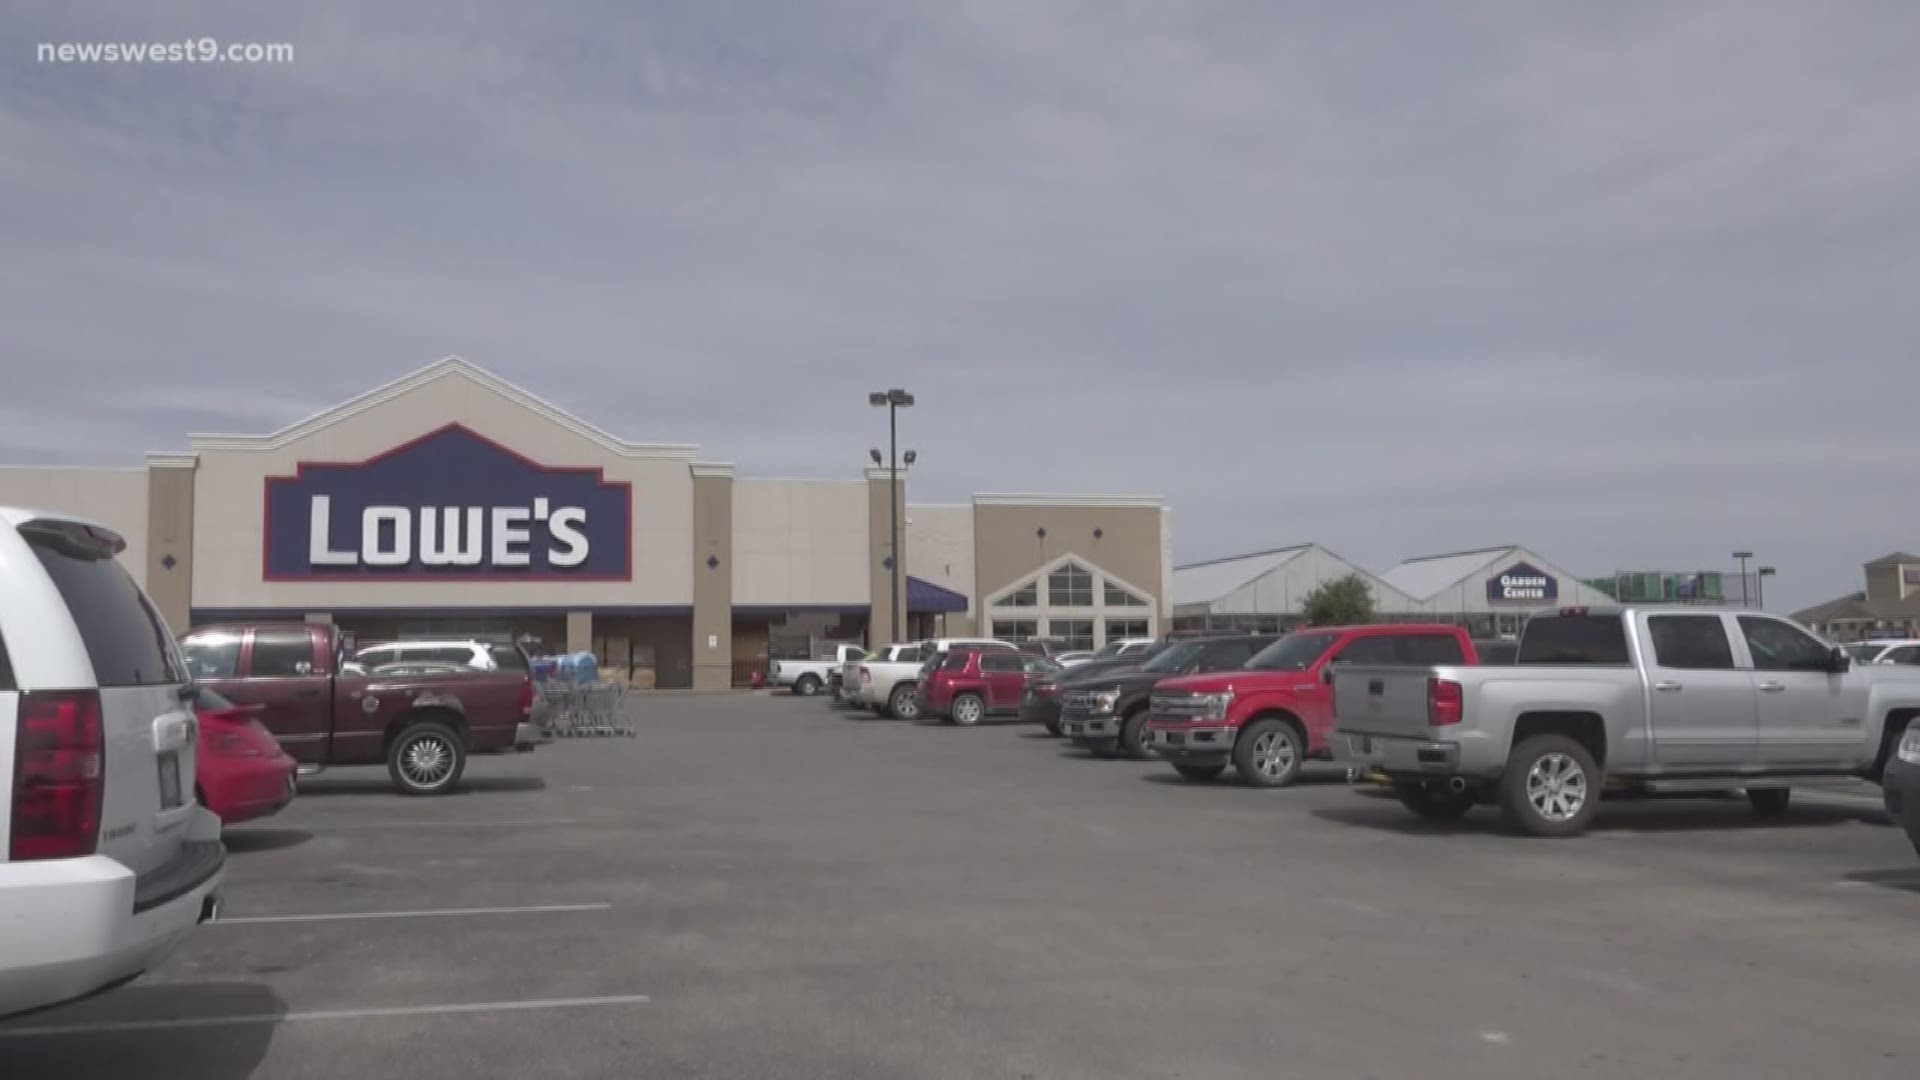 The device was found near Lowe's Home Improvement.